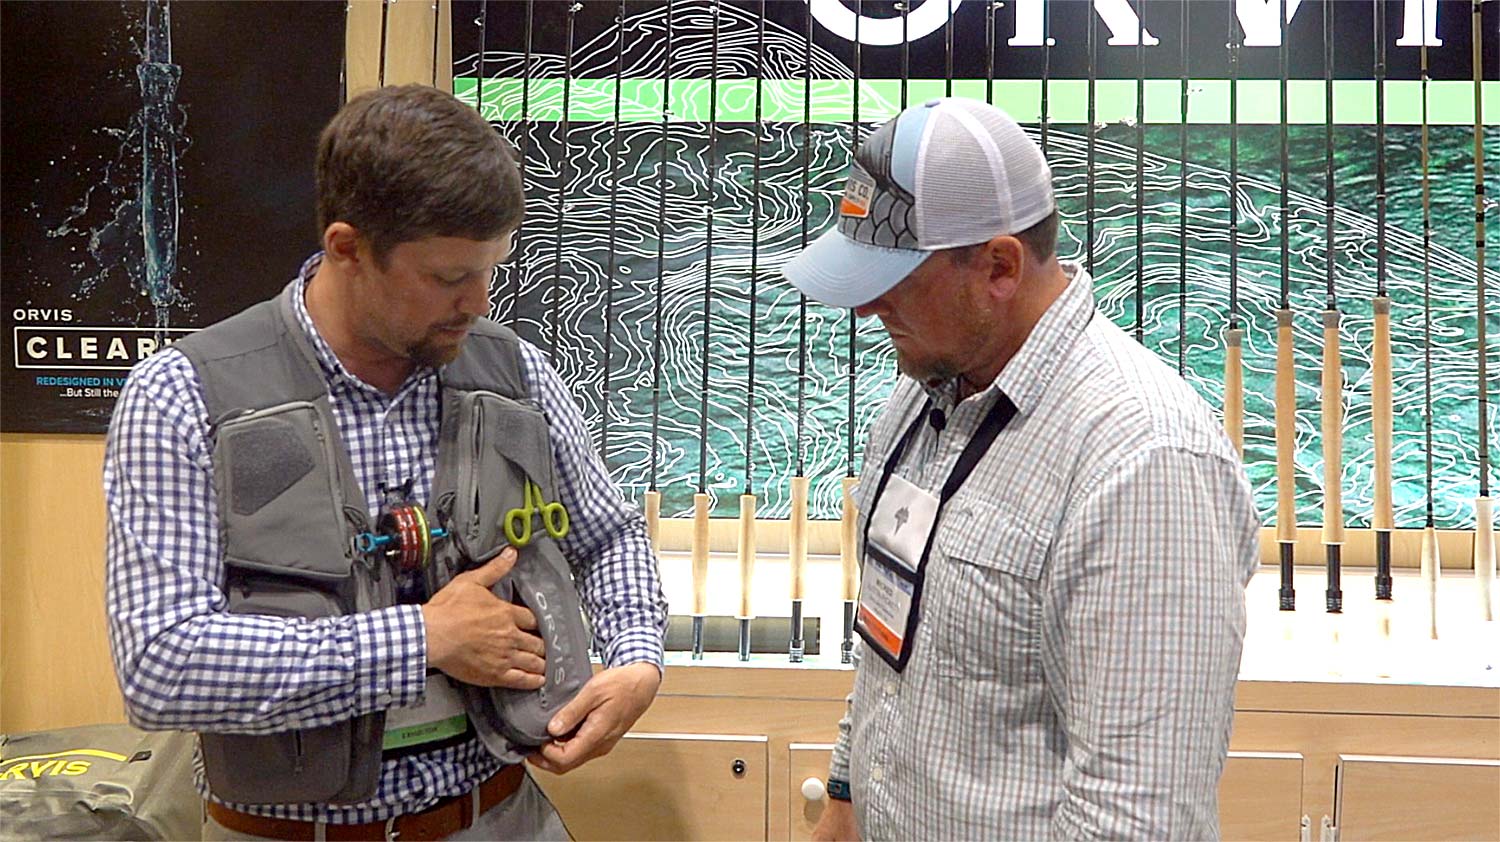 The Orvis Pro Vest: Video - Fly Fishing, Gink and Gasoline